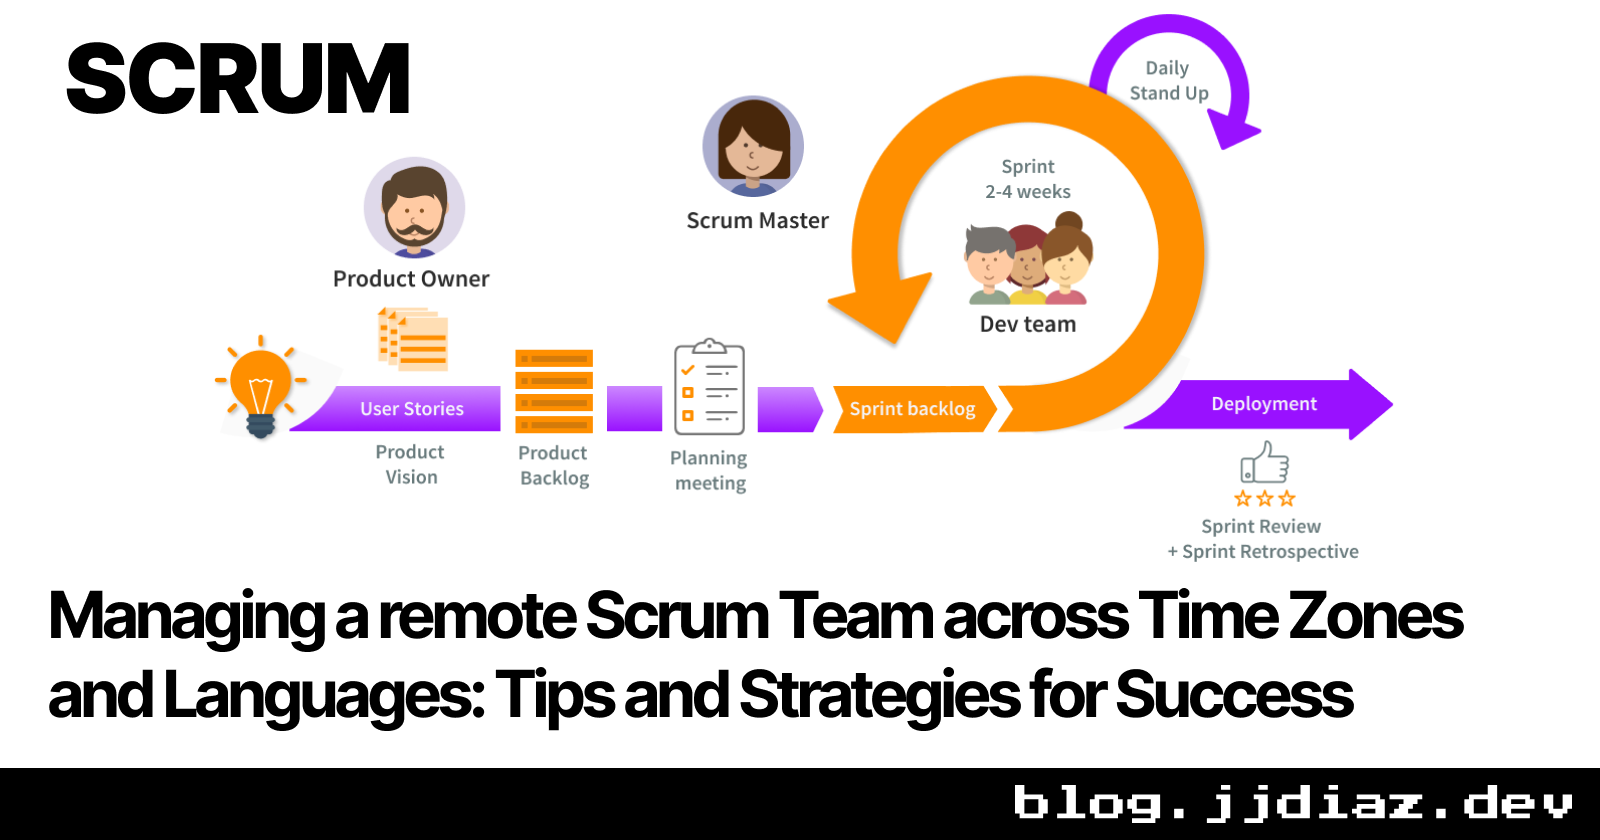 Managing a remote Scrum Team across Time Zones and Languages: Tips and Strategies for Success